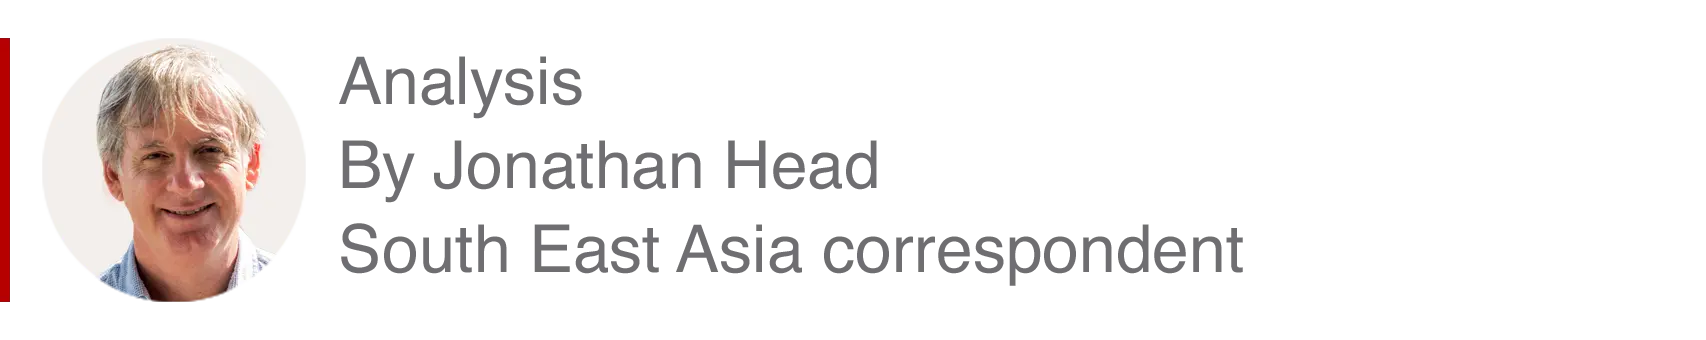 Analysis box by Jonathan Head, South East Asia correspondent